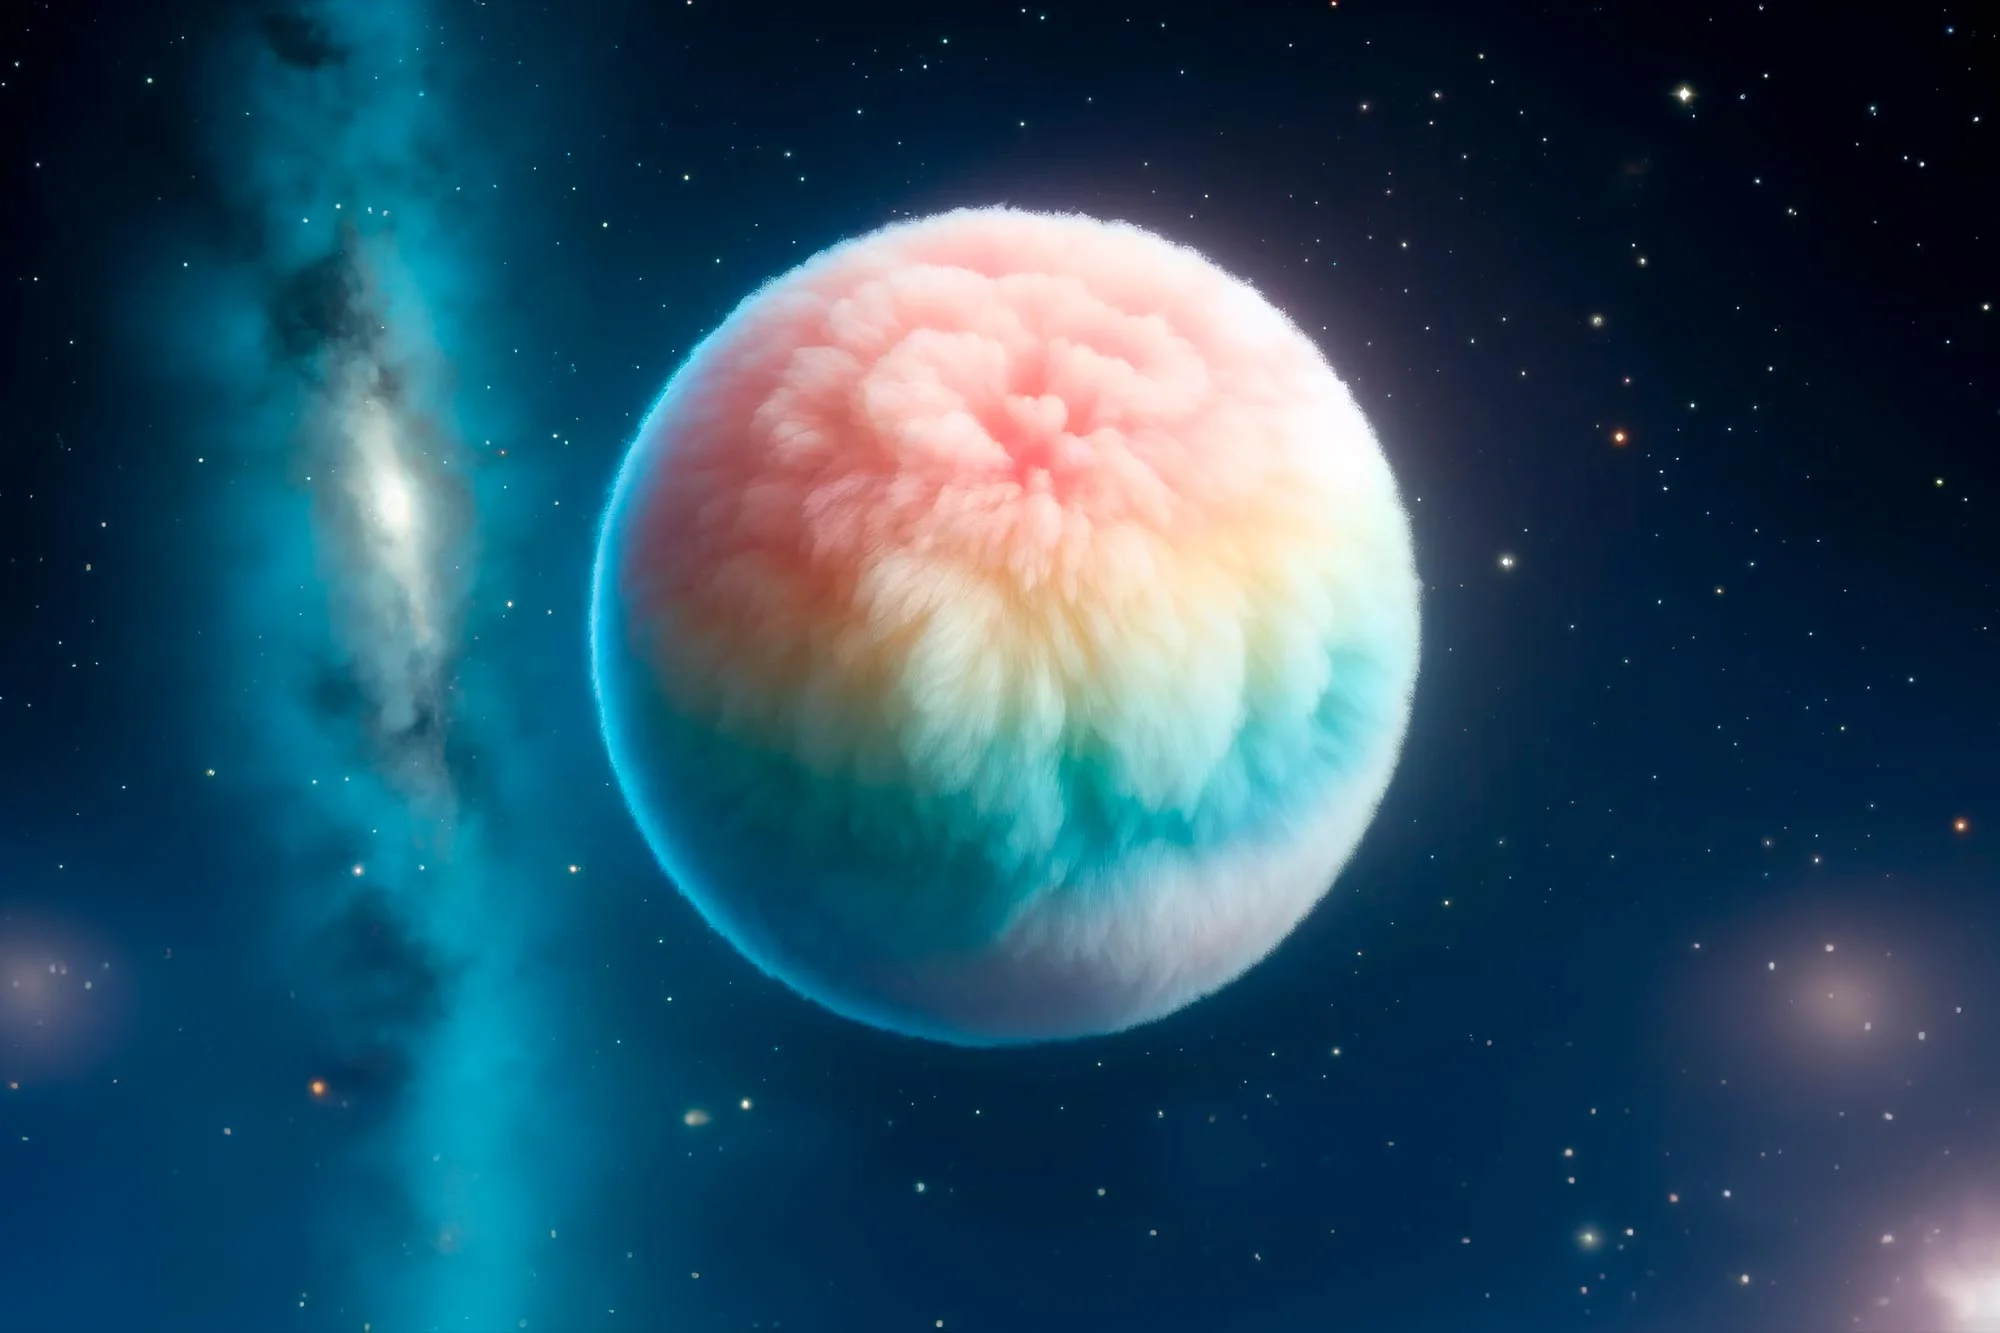 Cotton candy planet upends theories about planetary evolution